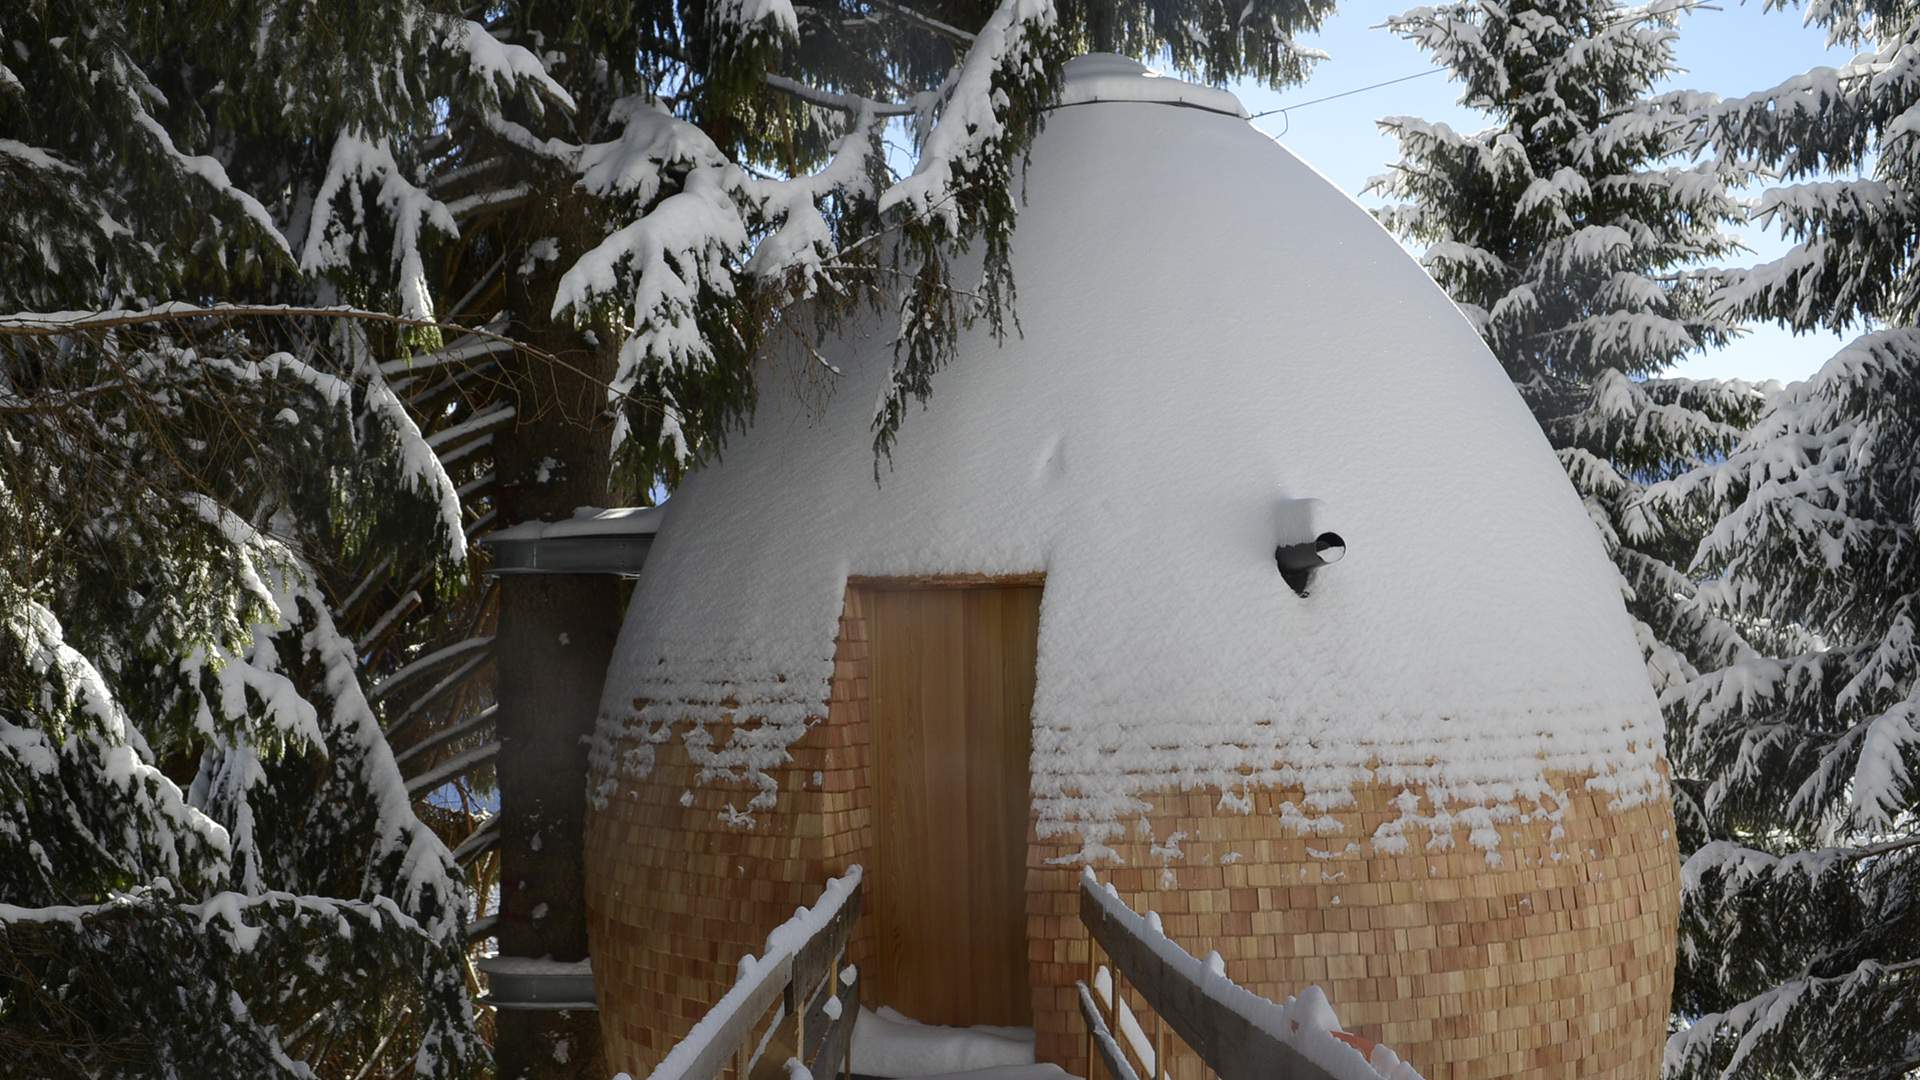 This Pinecone-Shaped Italian Holiday Home Is the Ultimate Treehouse With a View